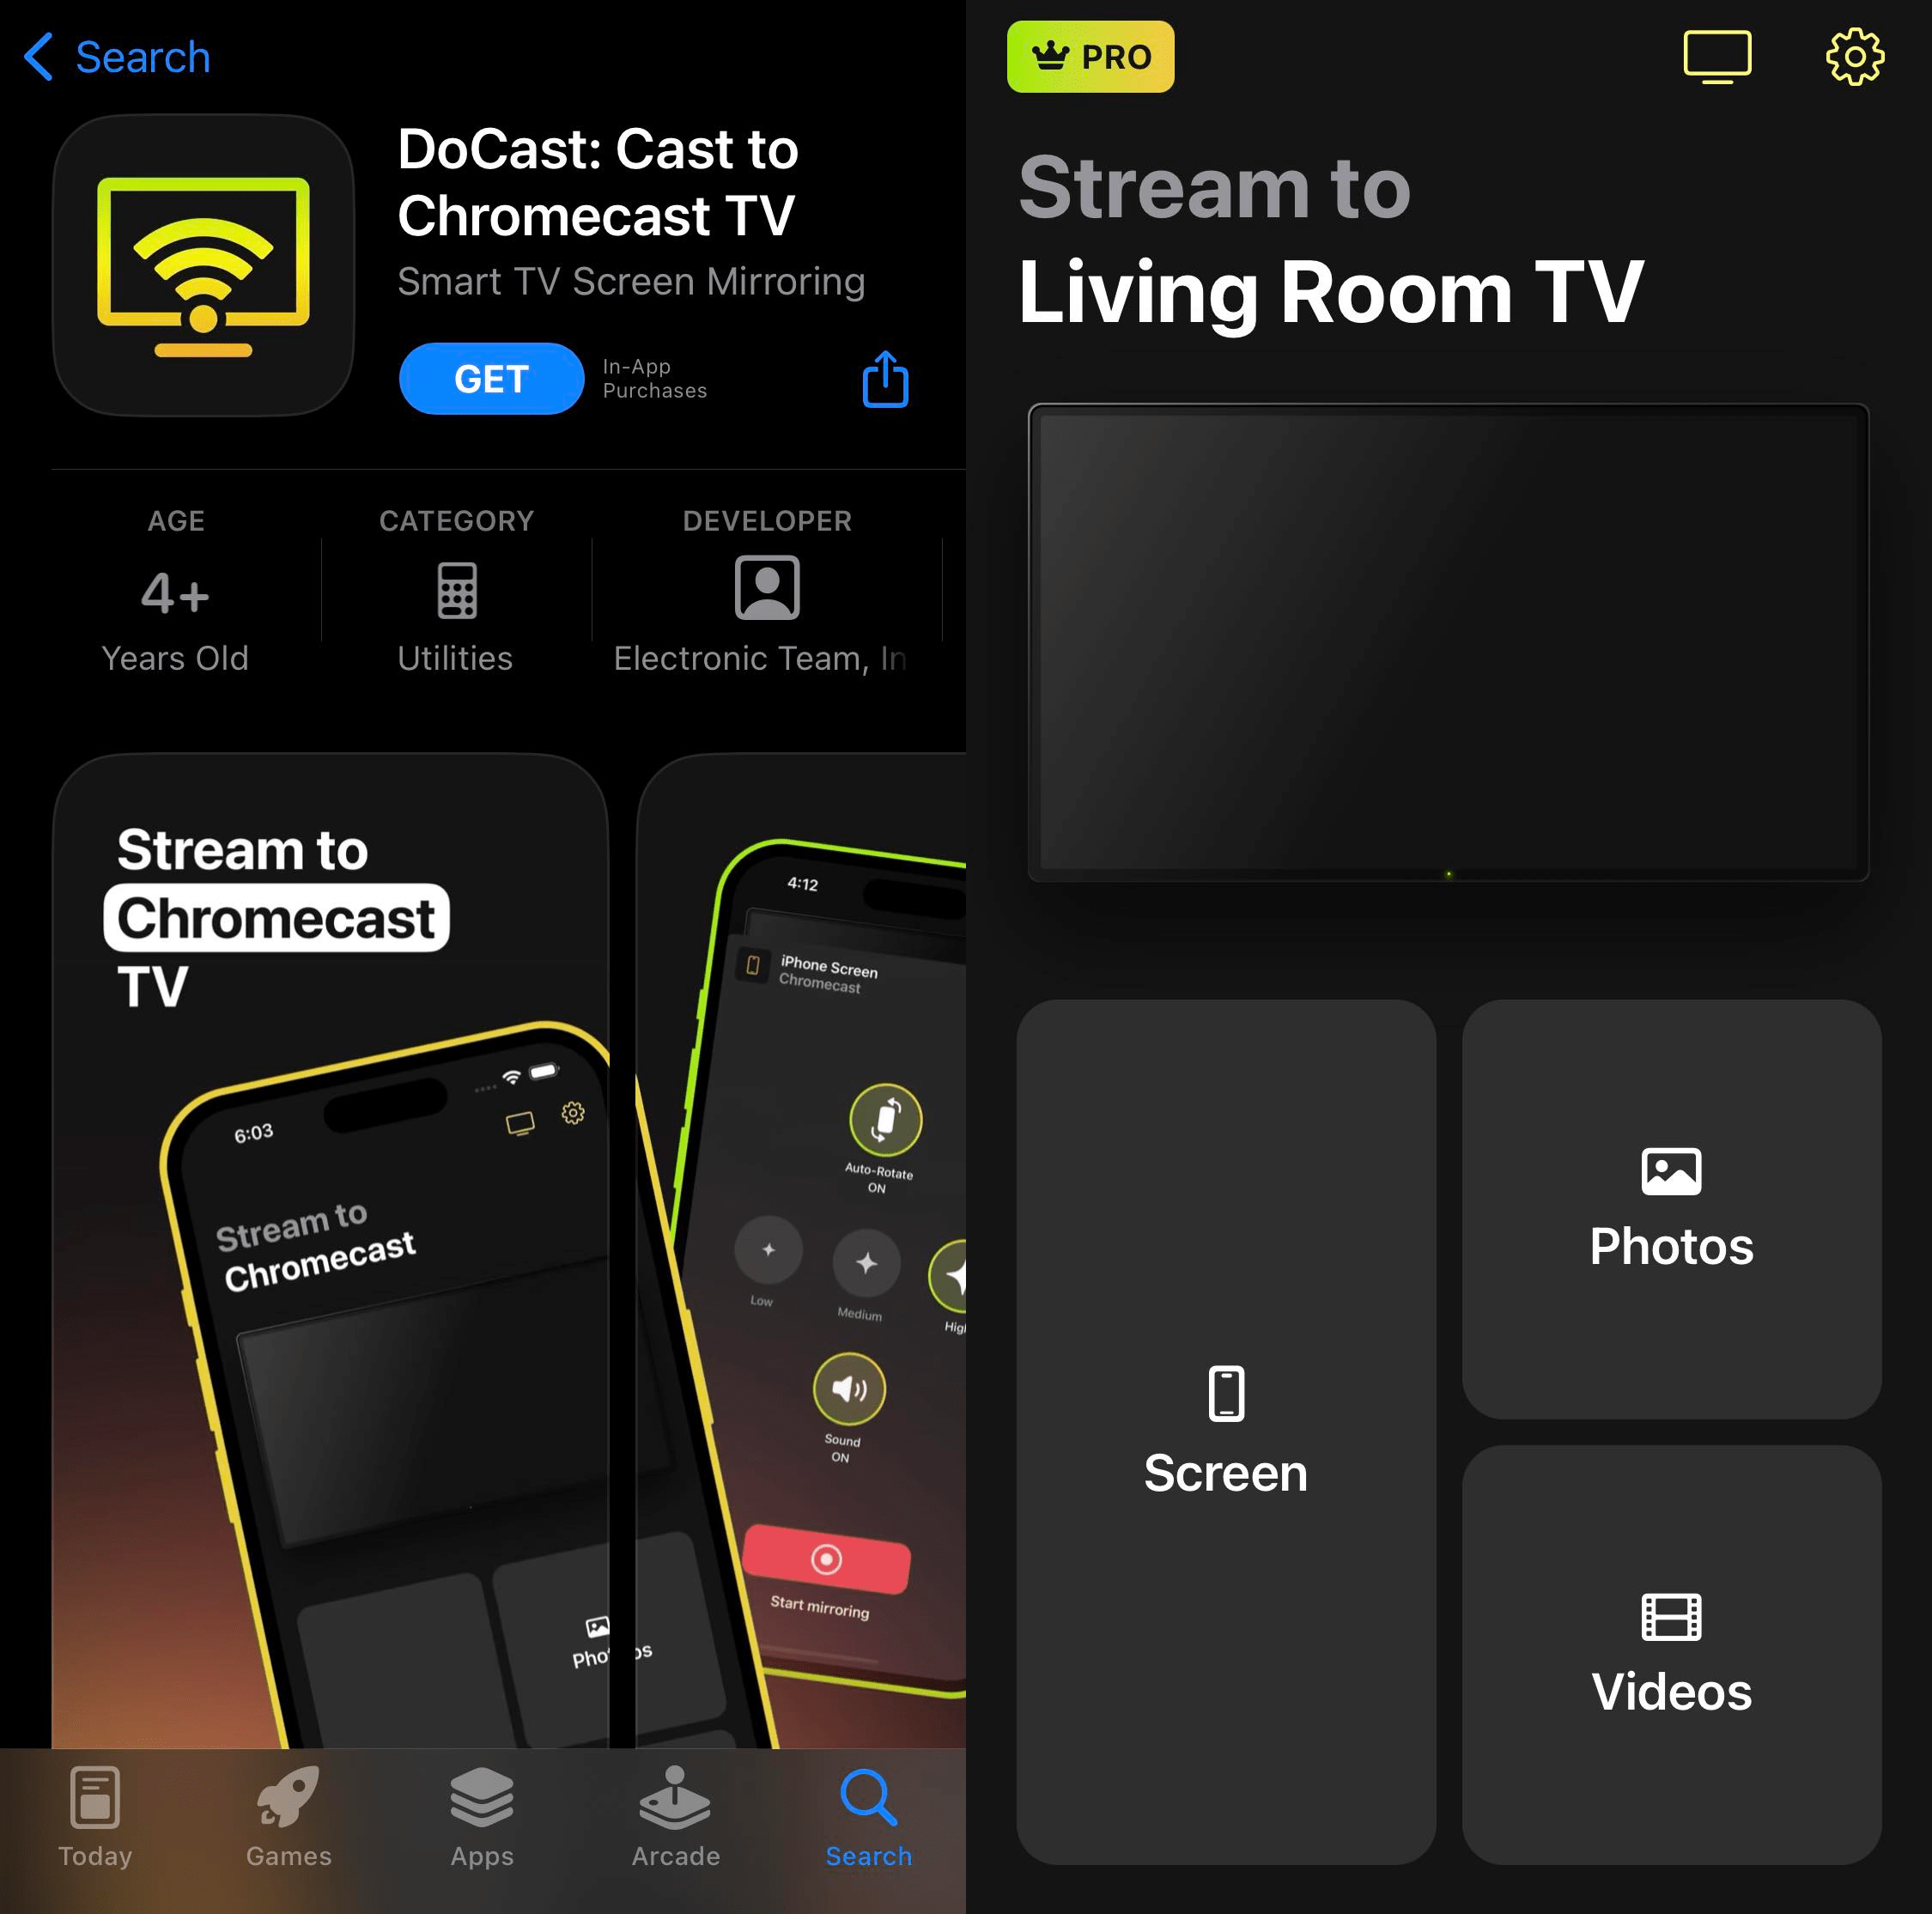 The DoCast app on the App Store and its homepage when launched